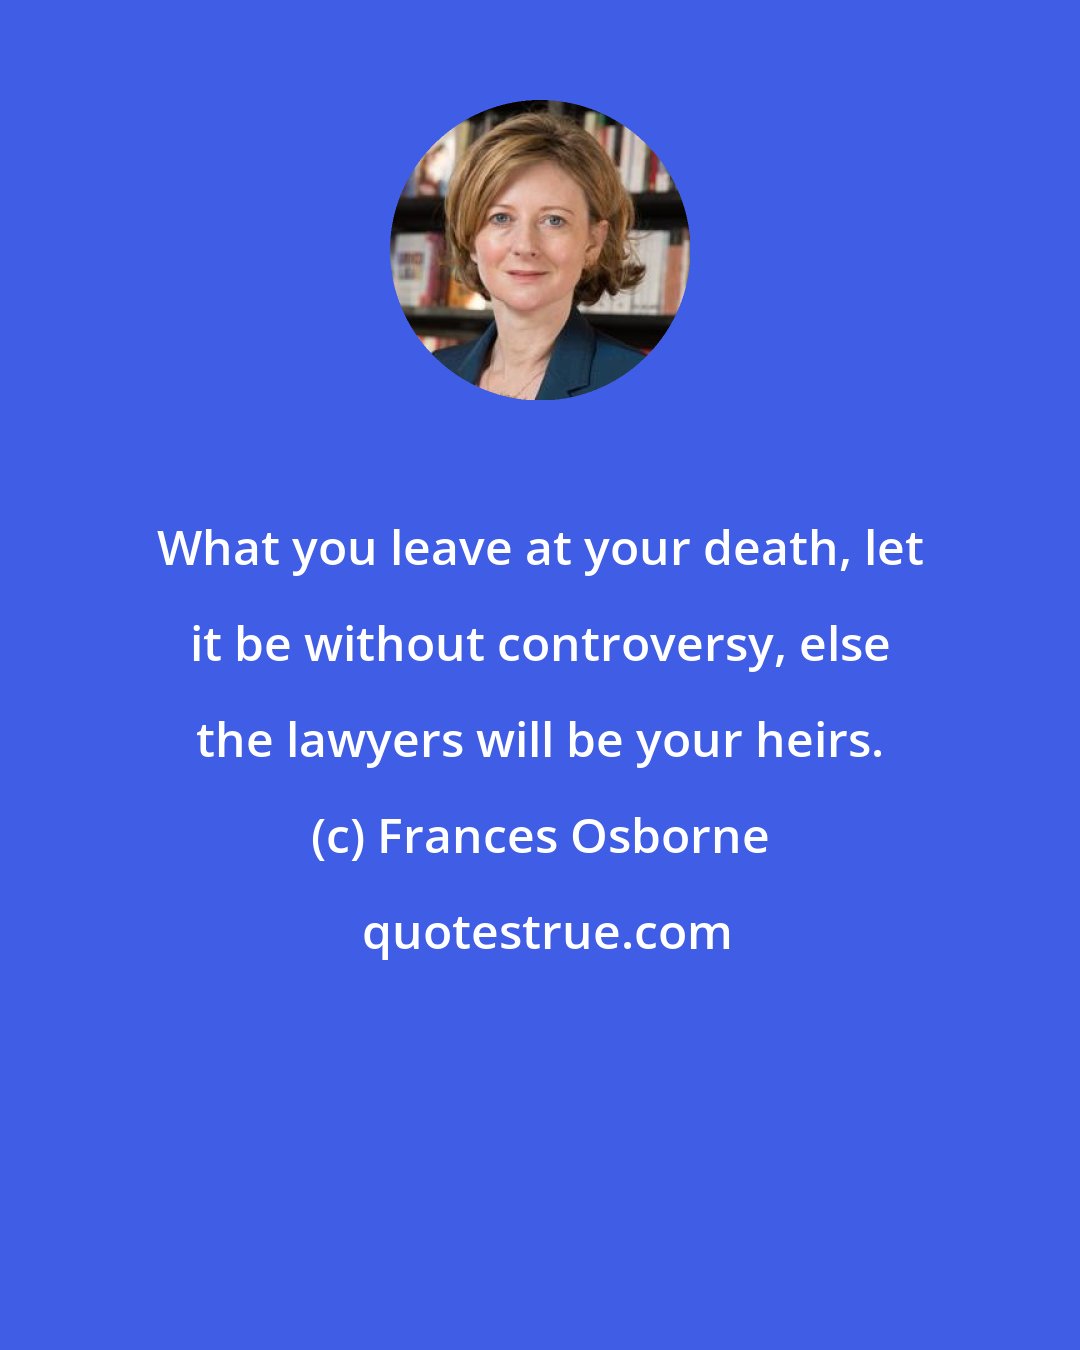 Frances Osborne: What you leave at your death, let it be without controversy, else the lawyers will be your heirs.